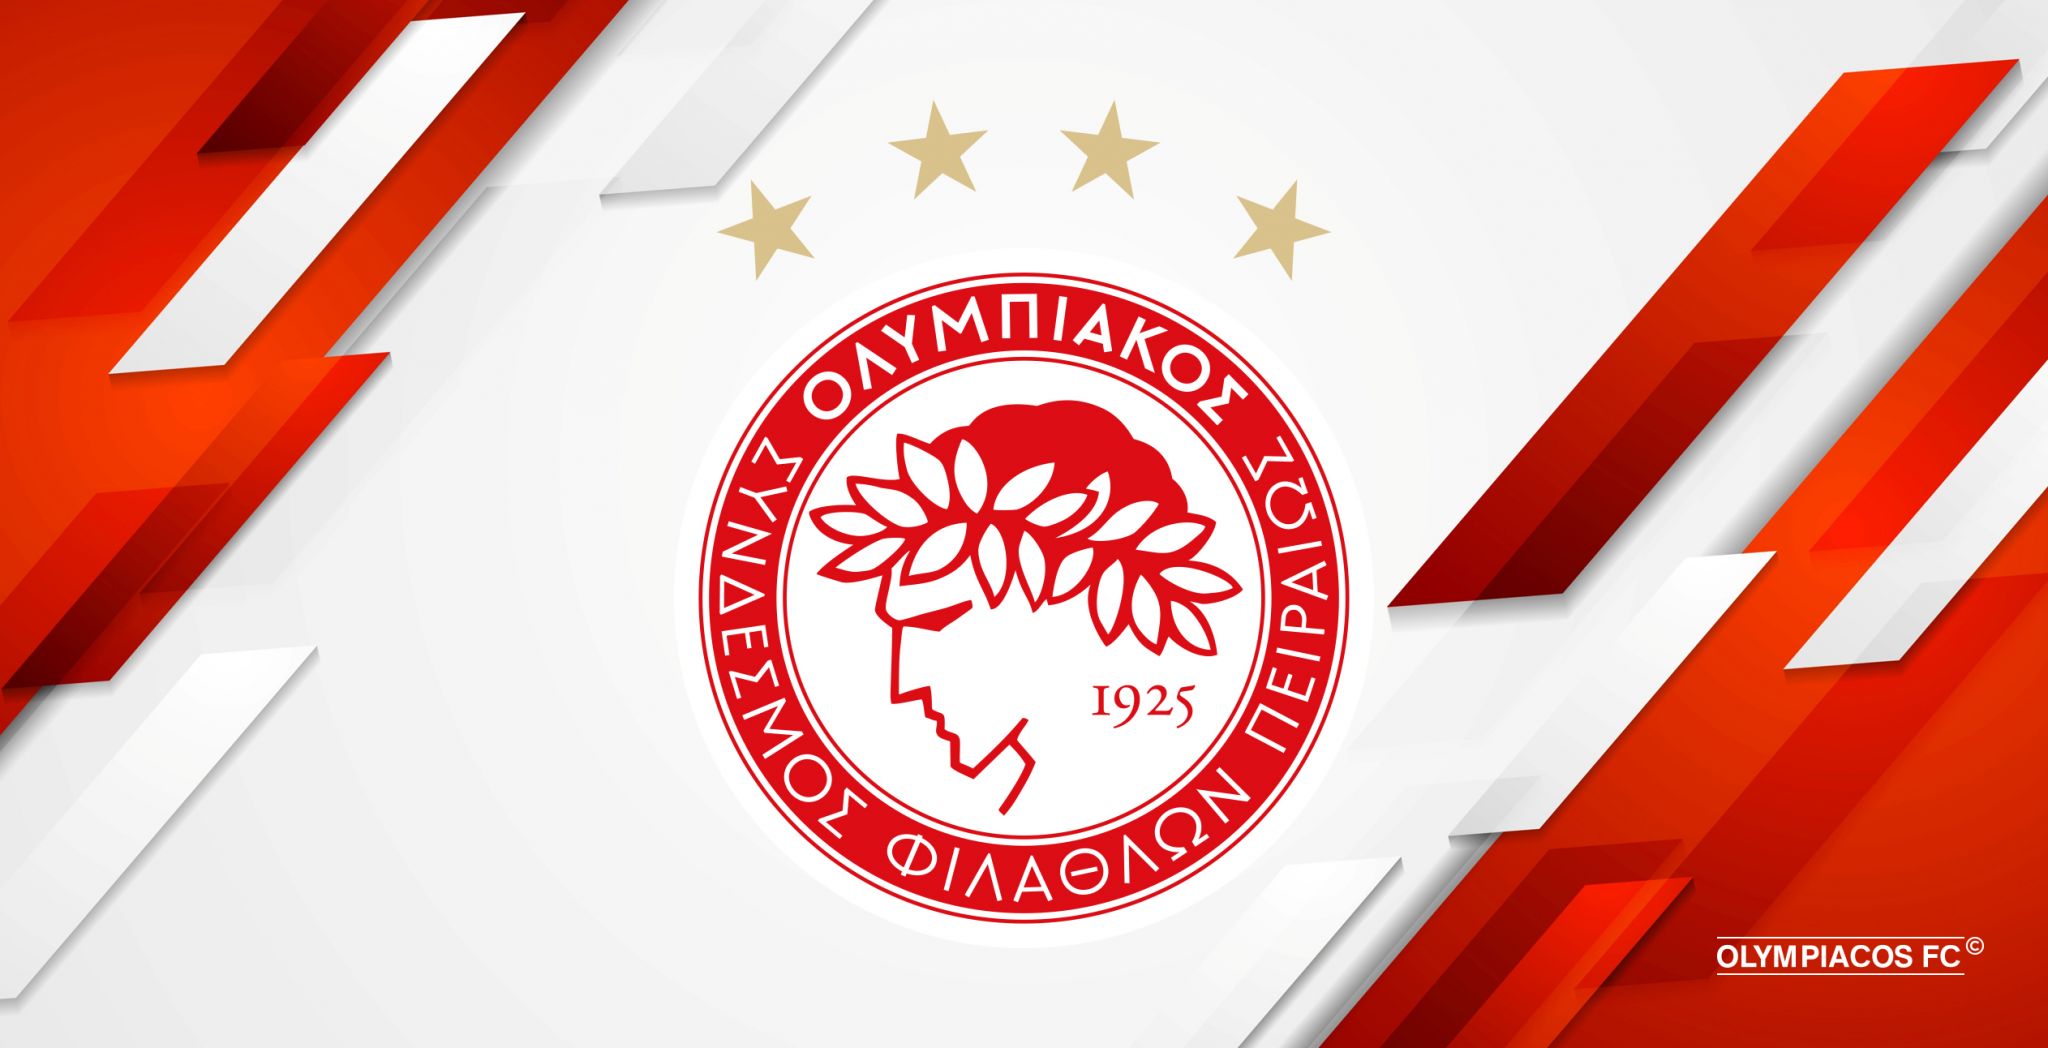 Olympiacos FC Announcement